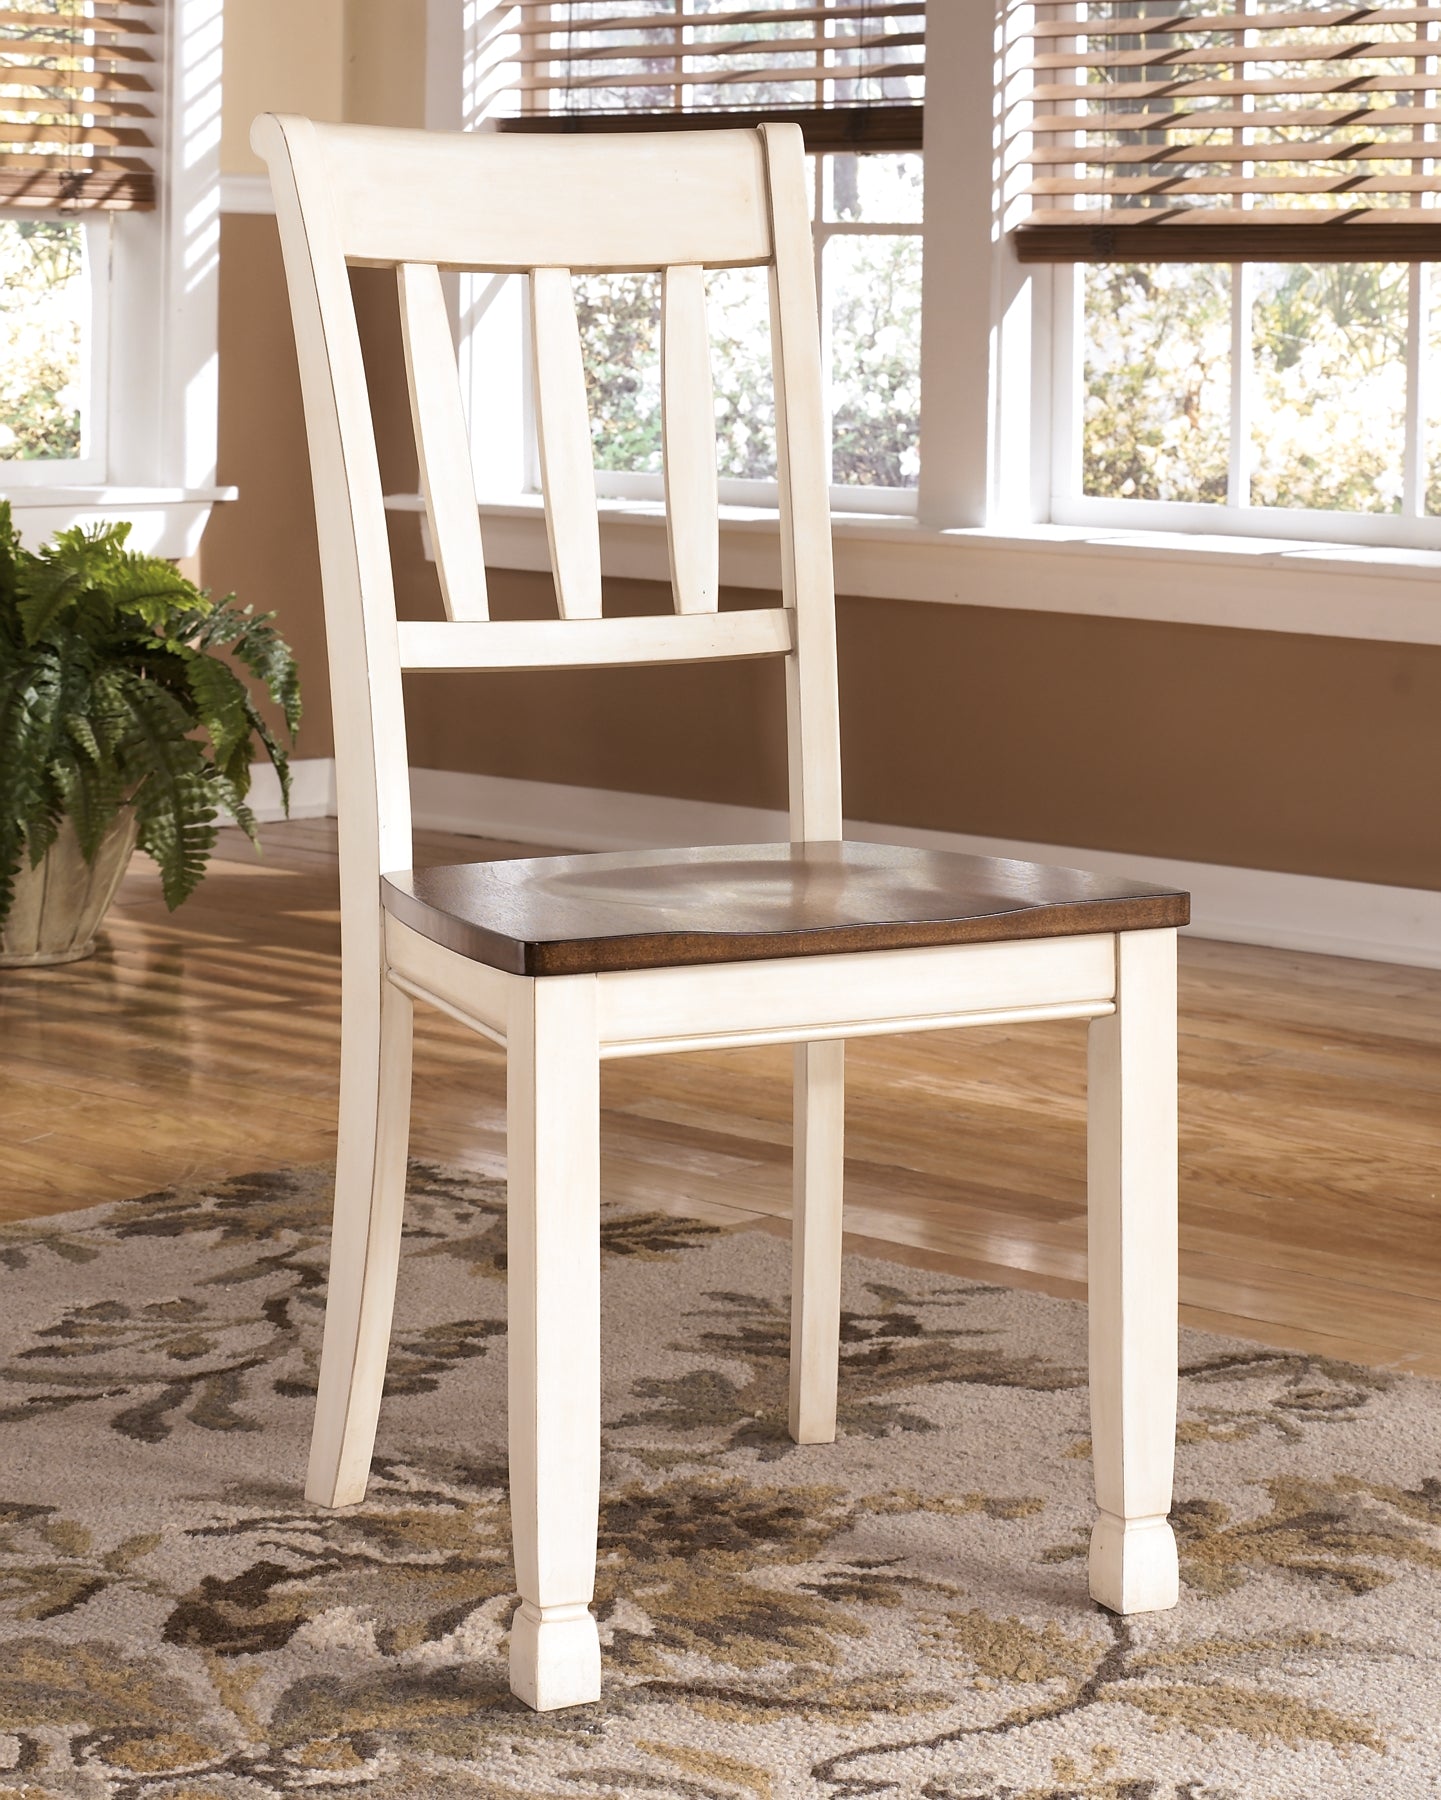 Whitesburg Dining Table and 4 Chairs with Storage JB's Furniture  Home Furniture, Home Decor, Furniture Store